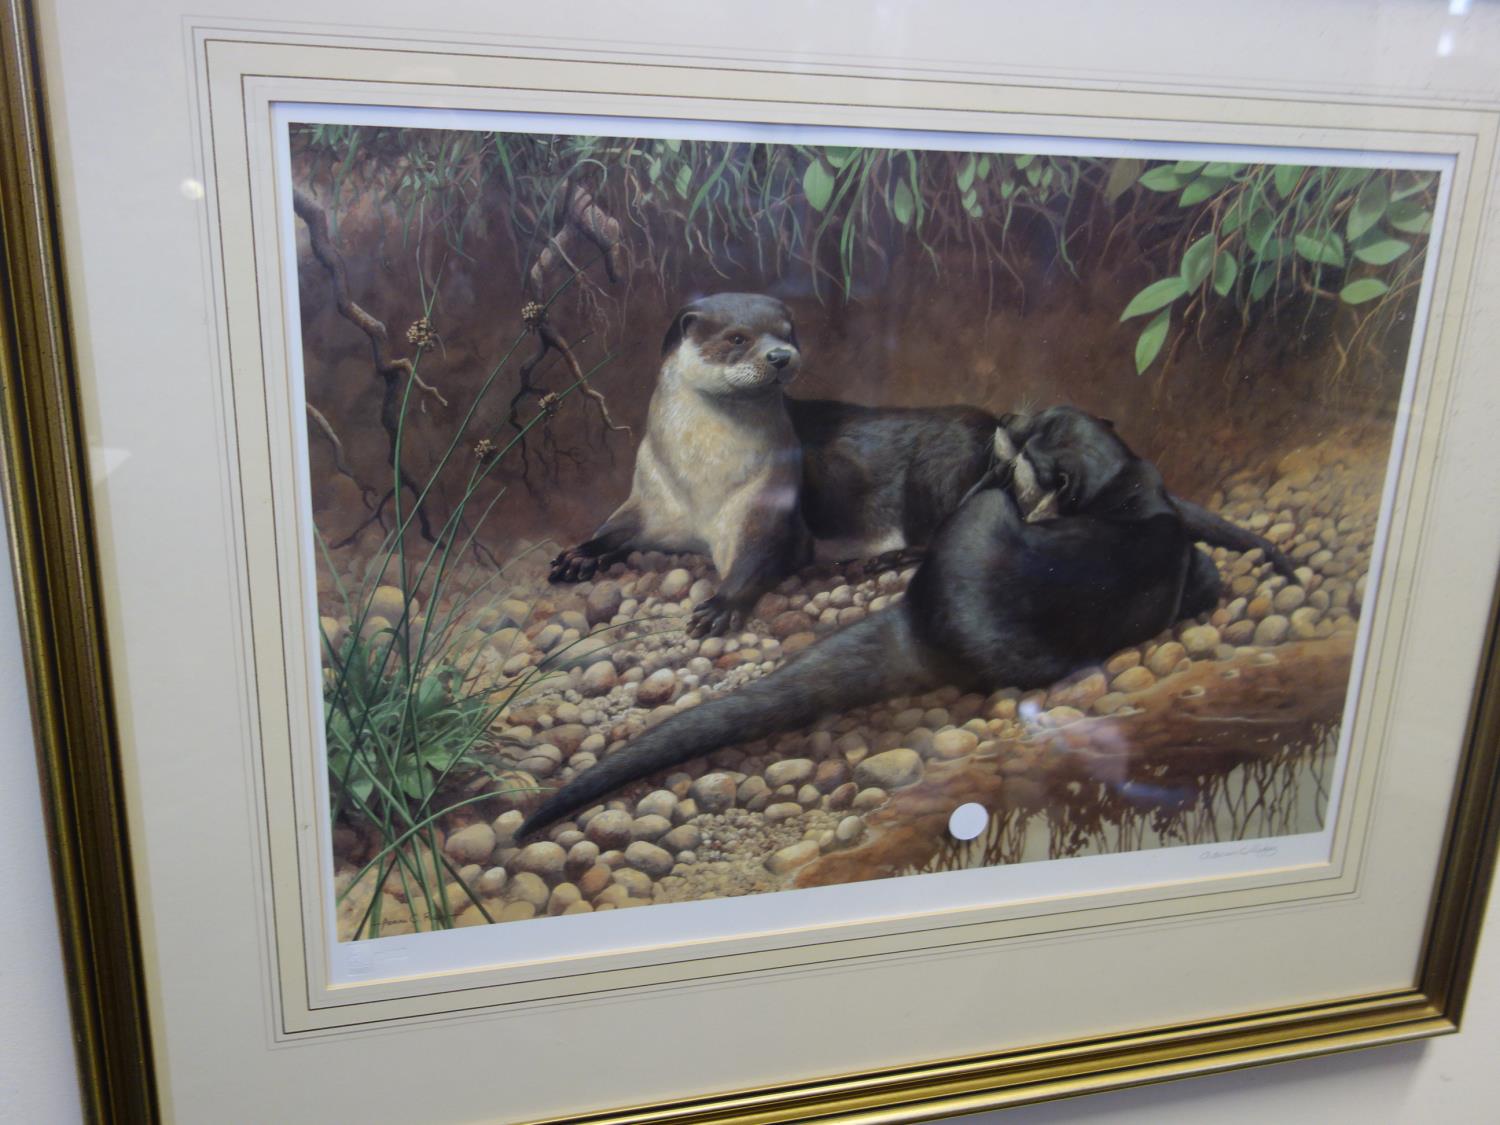 Gilt f/g Limited edition print, Badgers no:220 of 850 by Adrian C Rigby, and 1 other similar print - Image 2 of 4